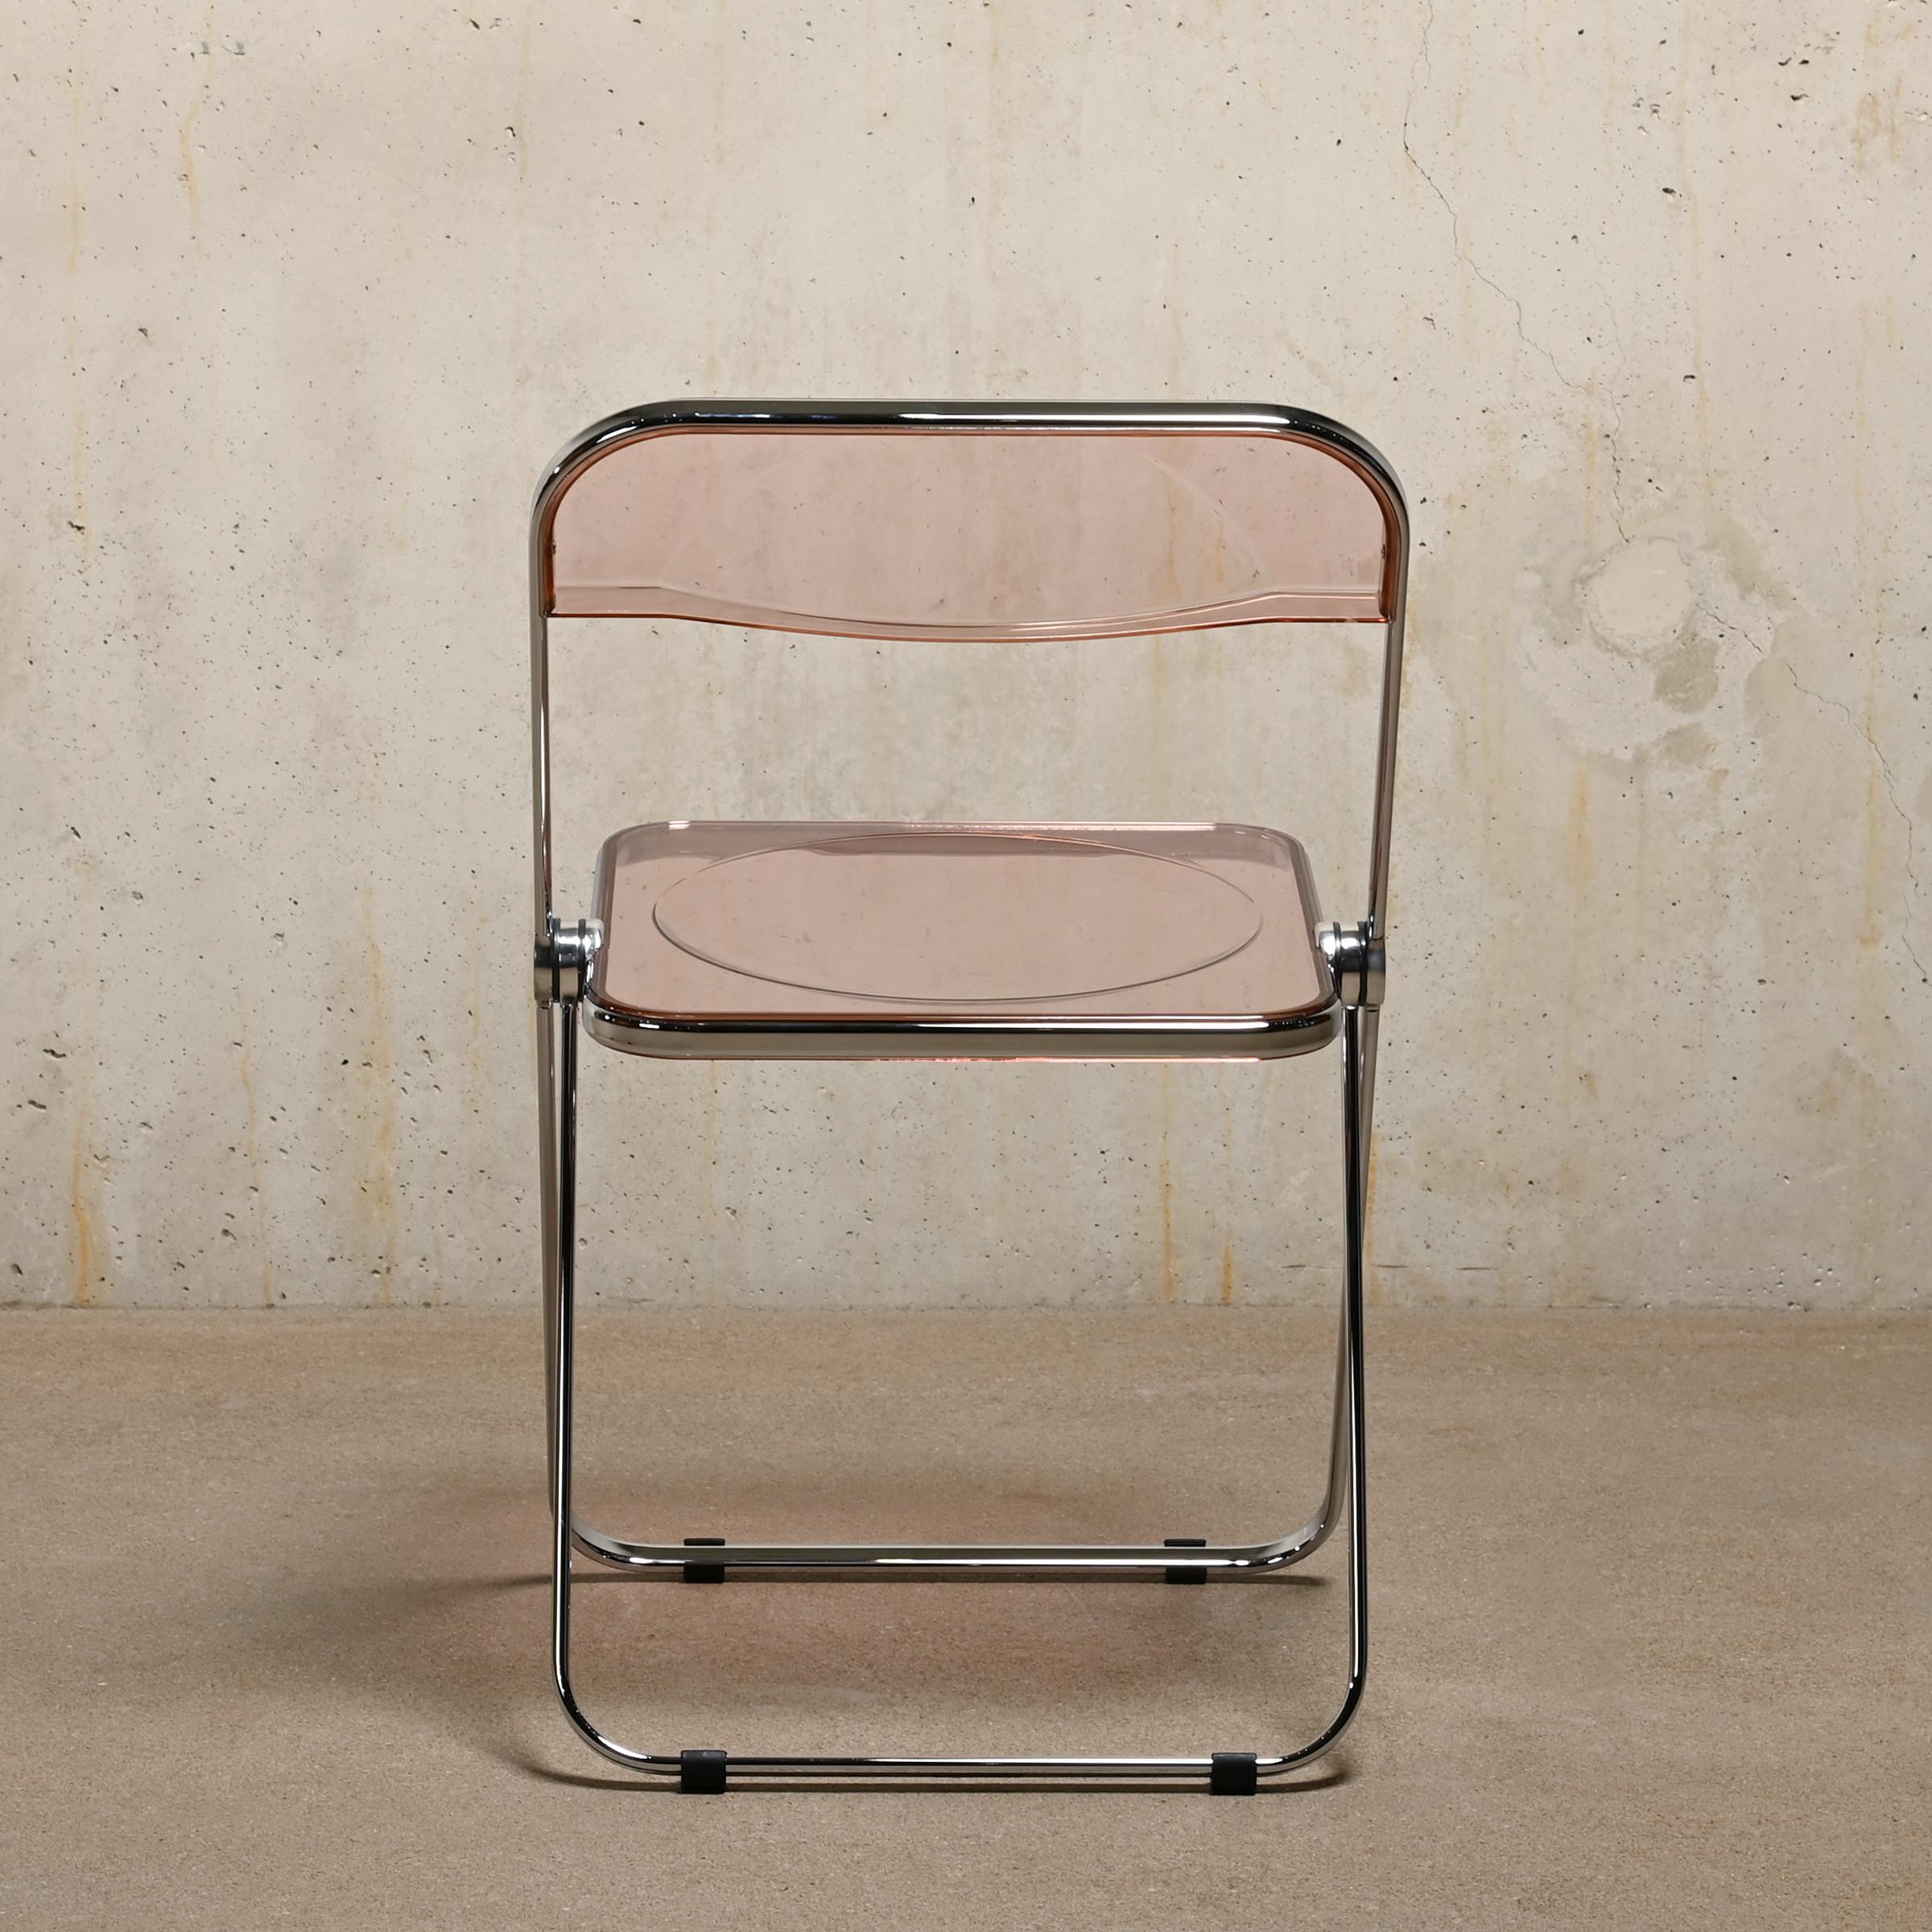 Plexiglass Giancarlo Piretti Plia Set Folding Chairs in Lucite Pink and Chrome for Castelli For Sale